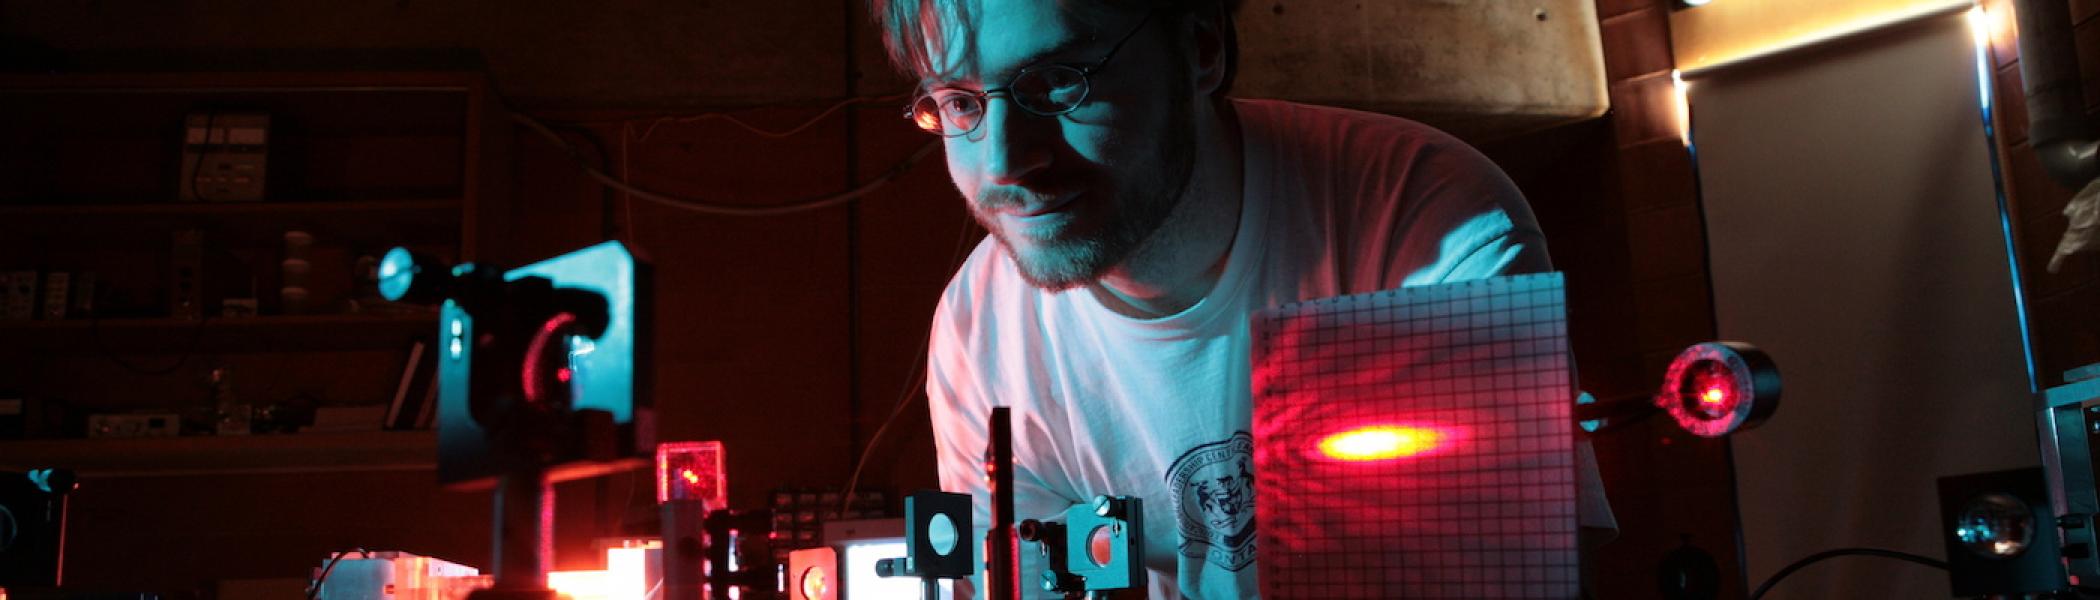 A student looking down at some electronics on his desk in dark red lighting